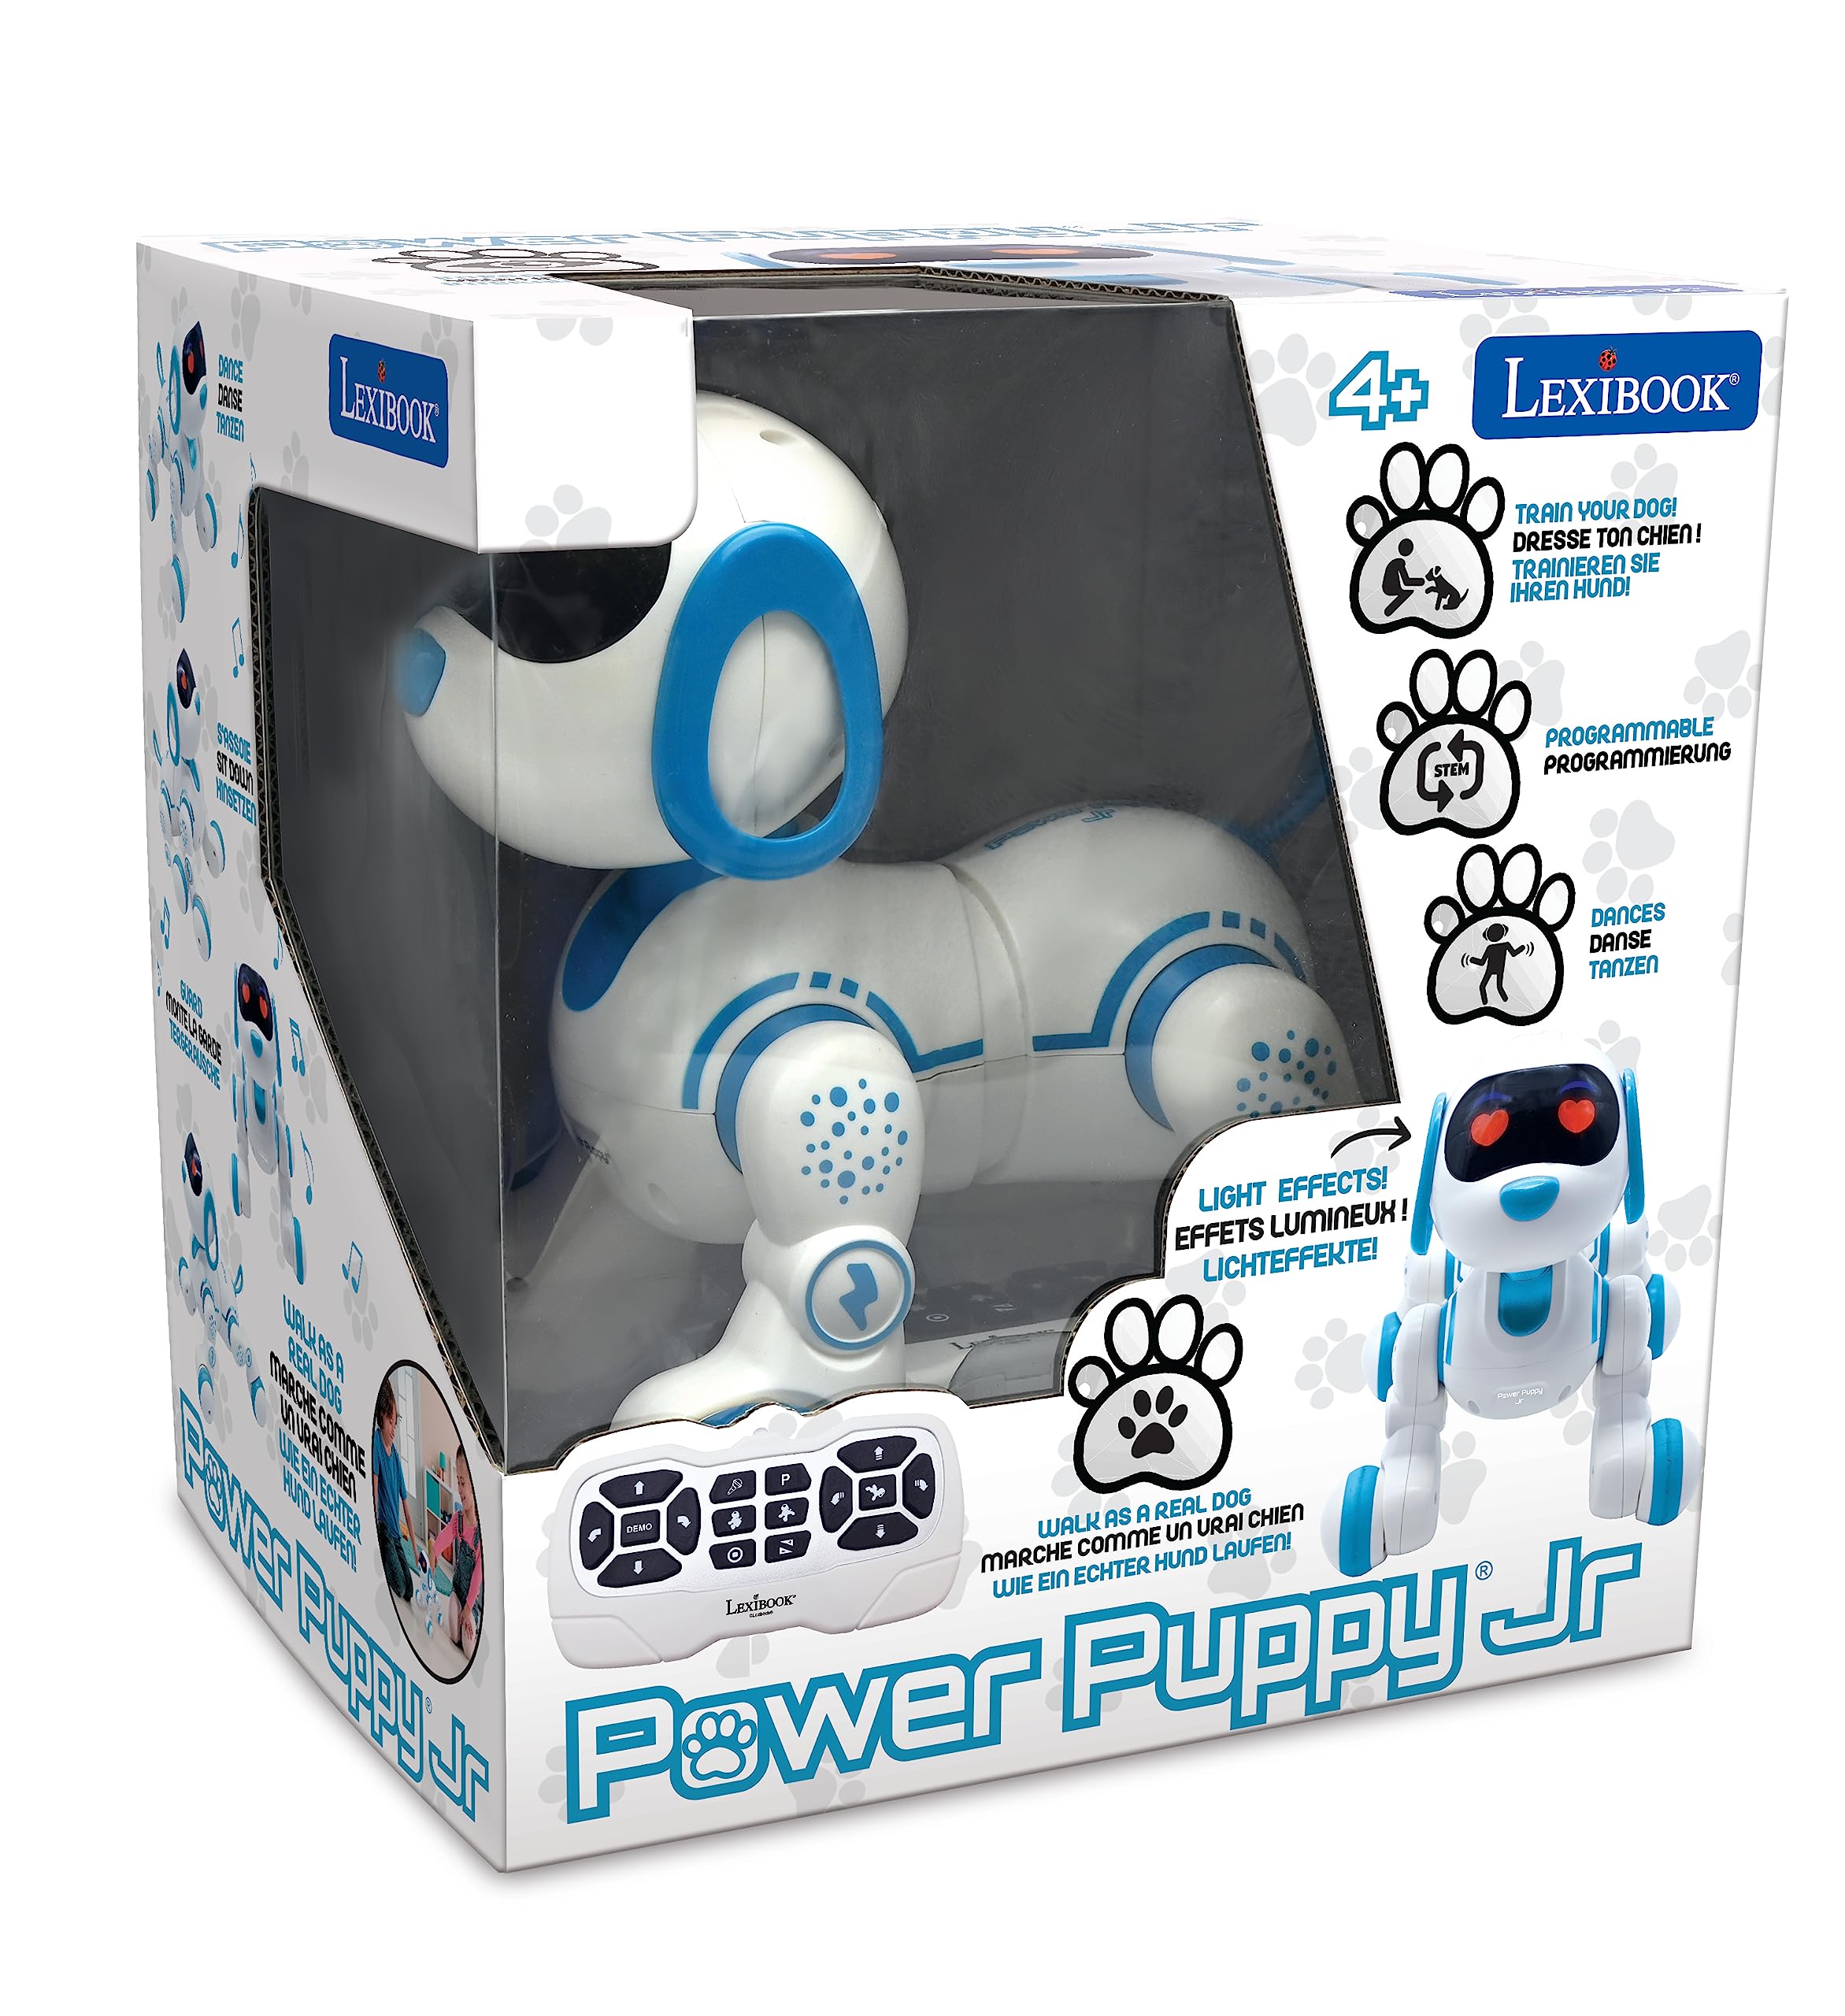 LEXiBOOK Power Puppy® Jr - My Little Robot Dog - Robot Dog with Sounds, Music, Light Effects - Barks and Walks Like a Real Dog, Toy for Boys and Girls - PUP01